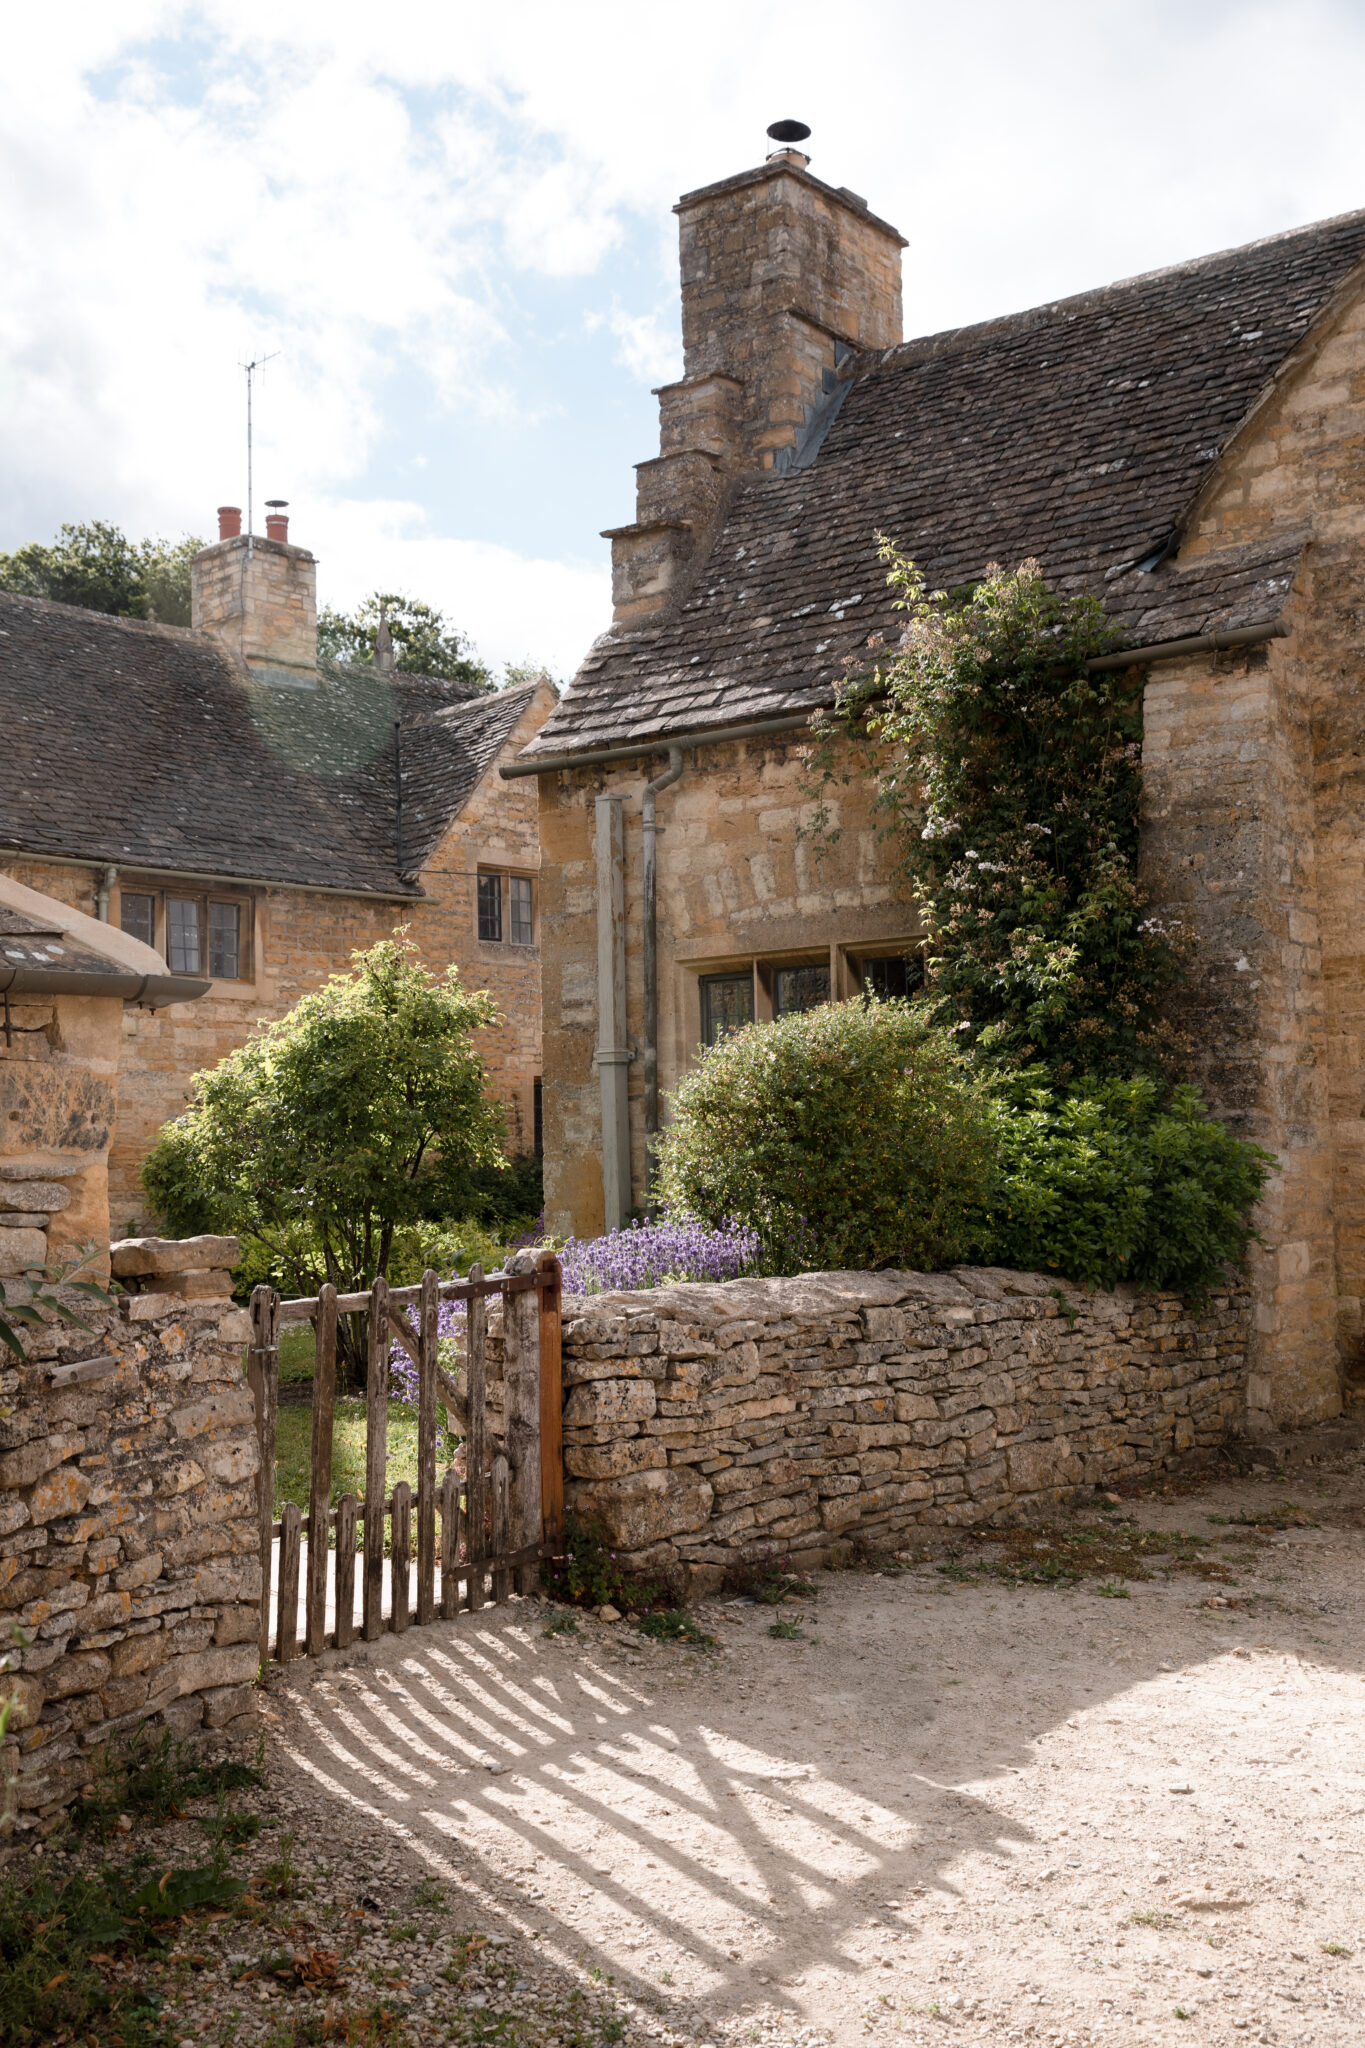 Number 3 The Square The Cotswolds cottage upper slaughter